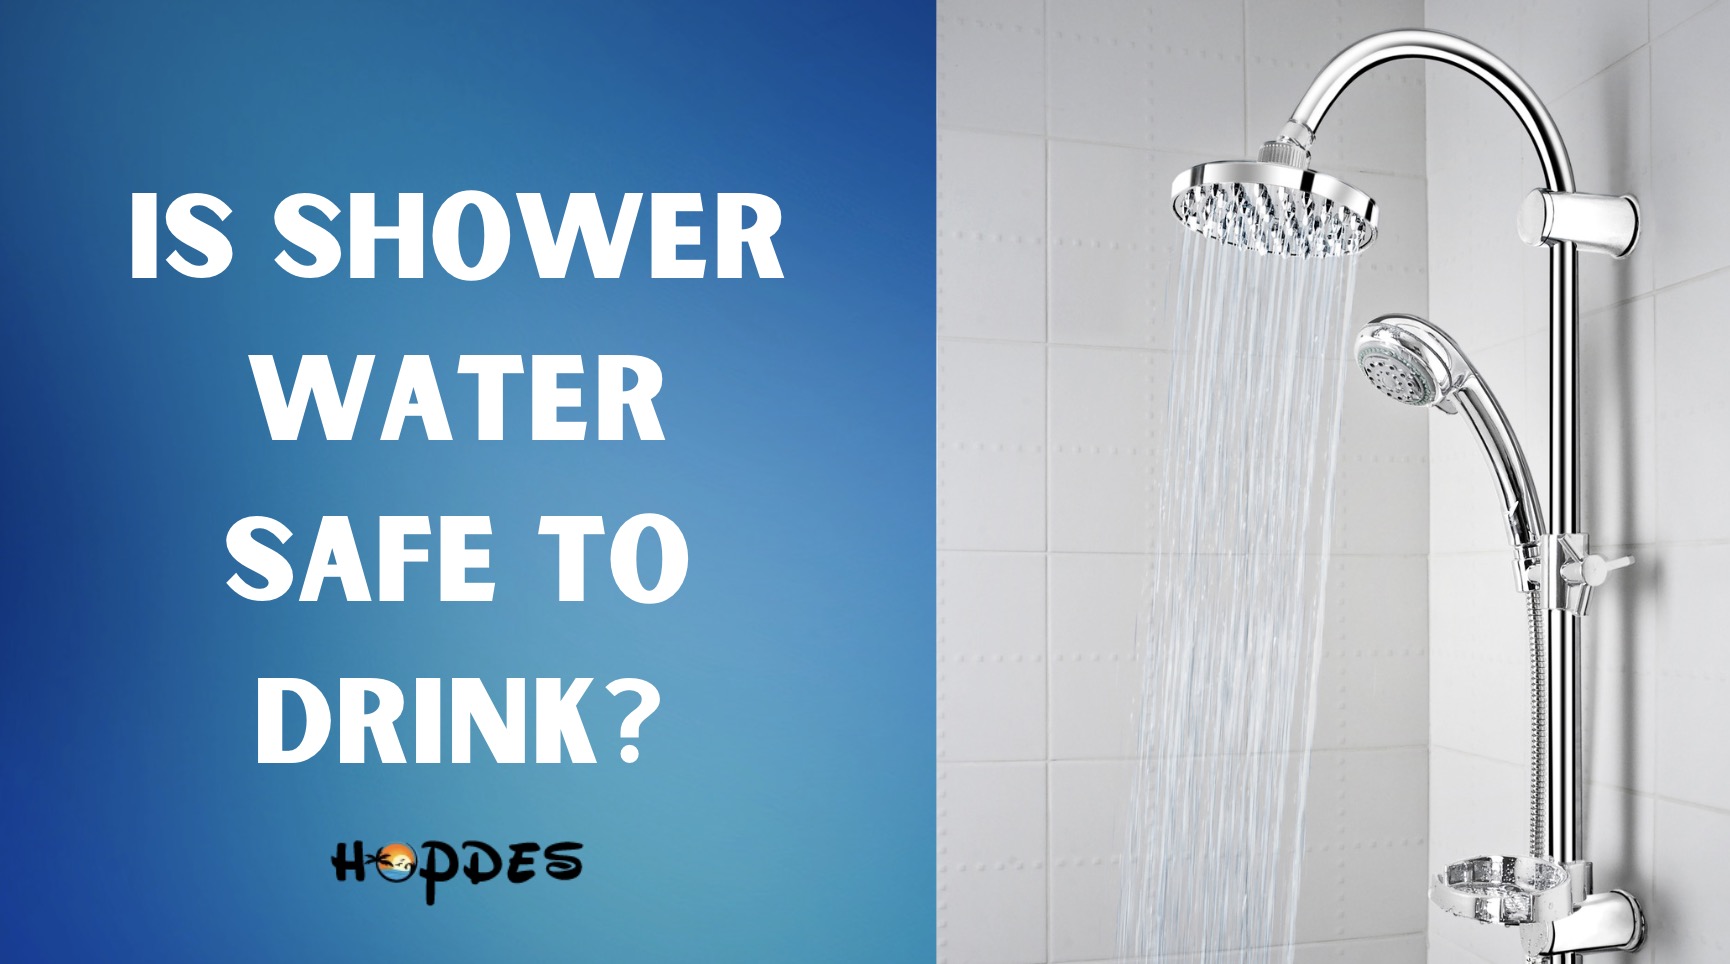 Is Shower Water Safe to Drink?